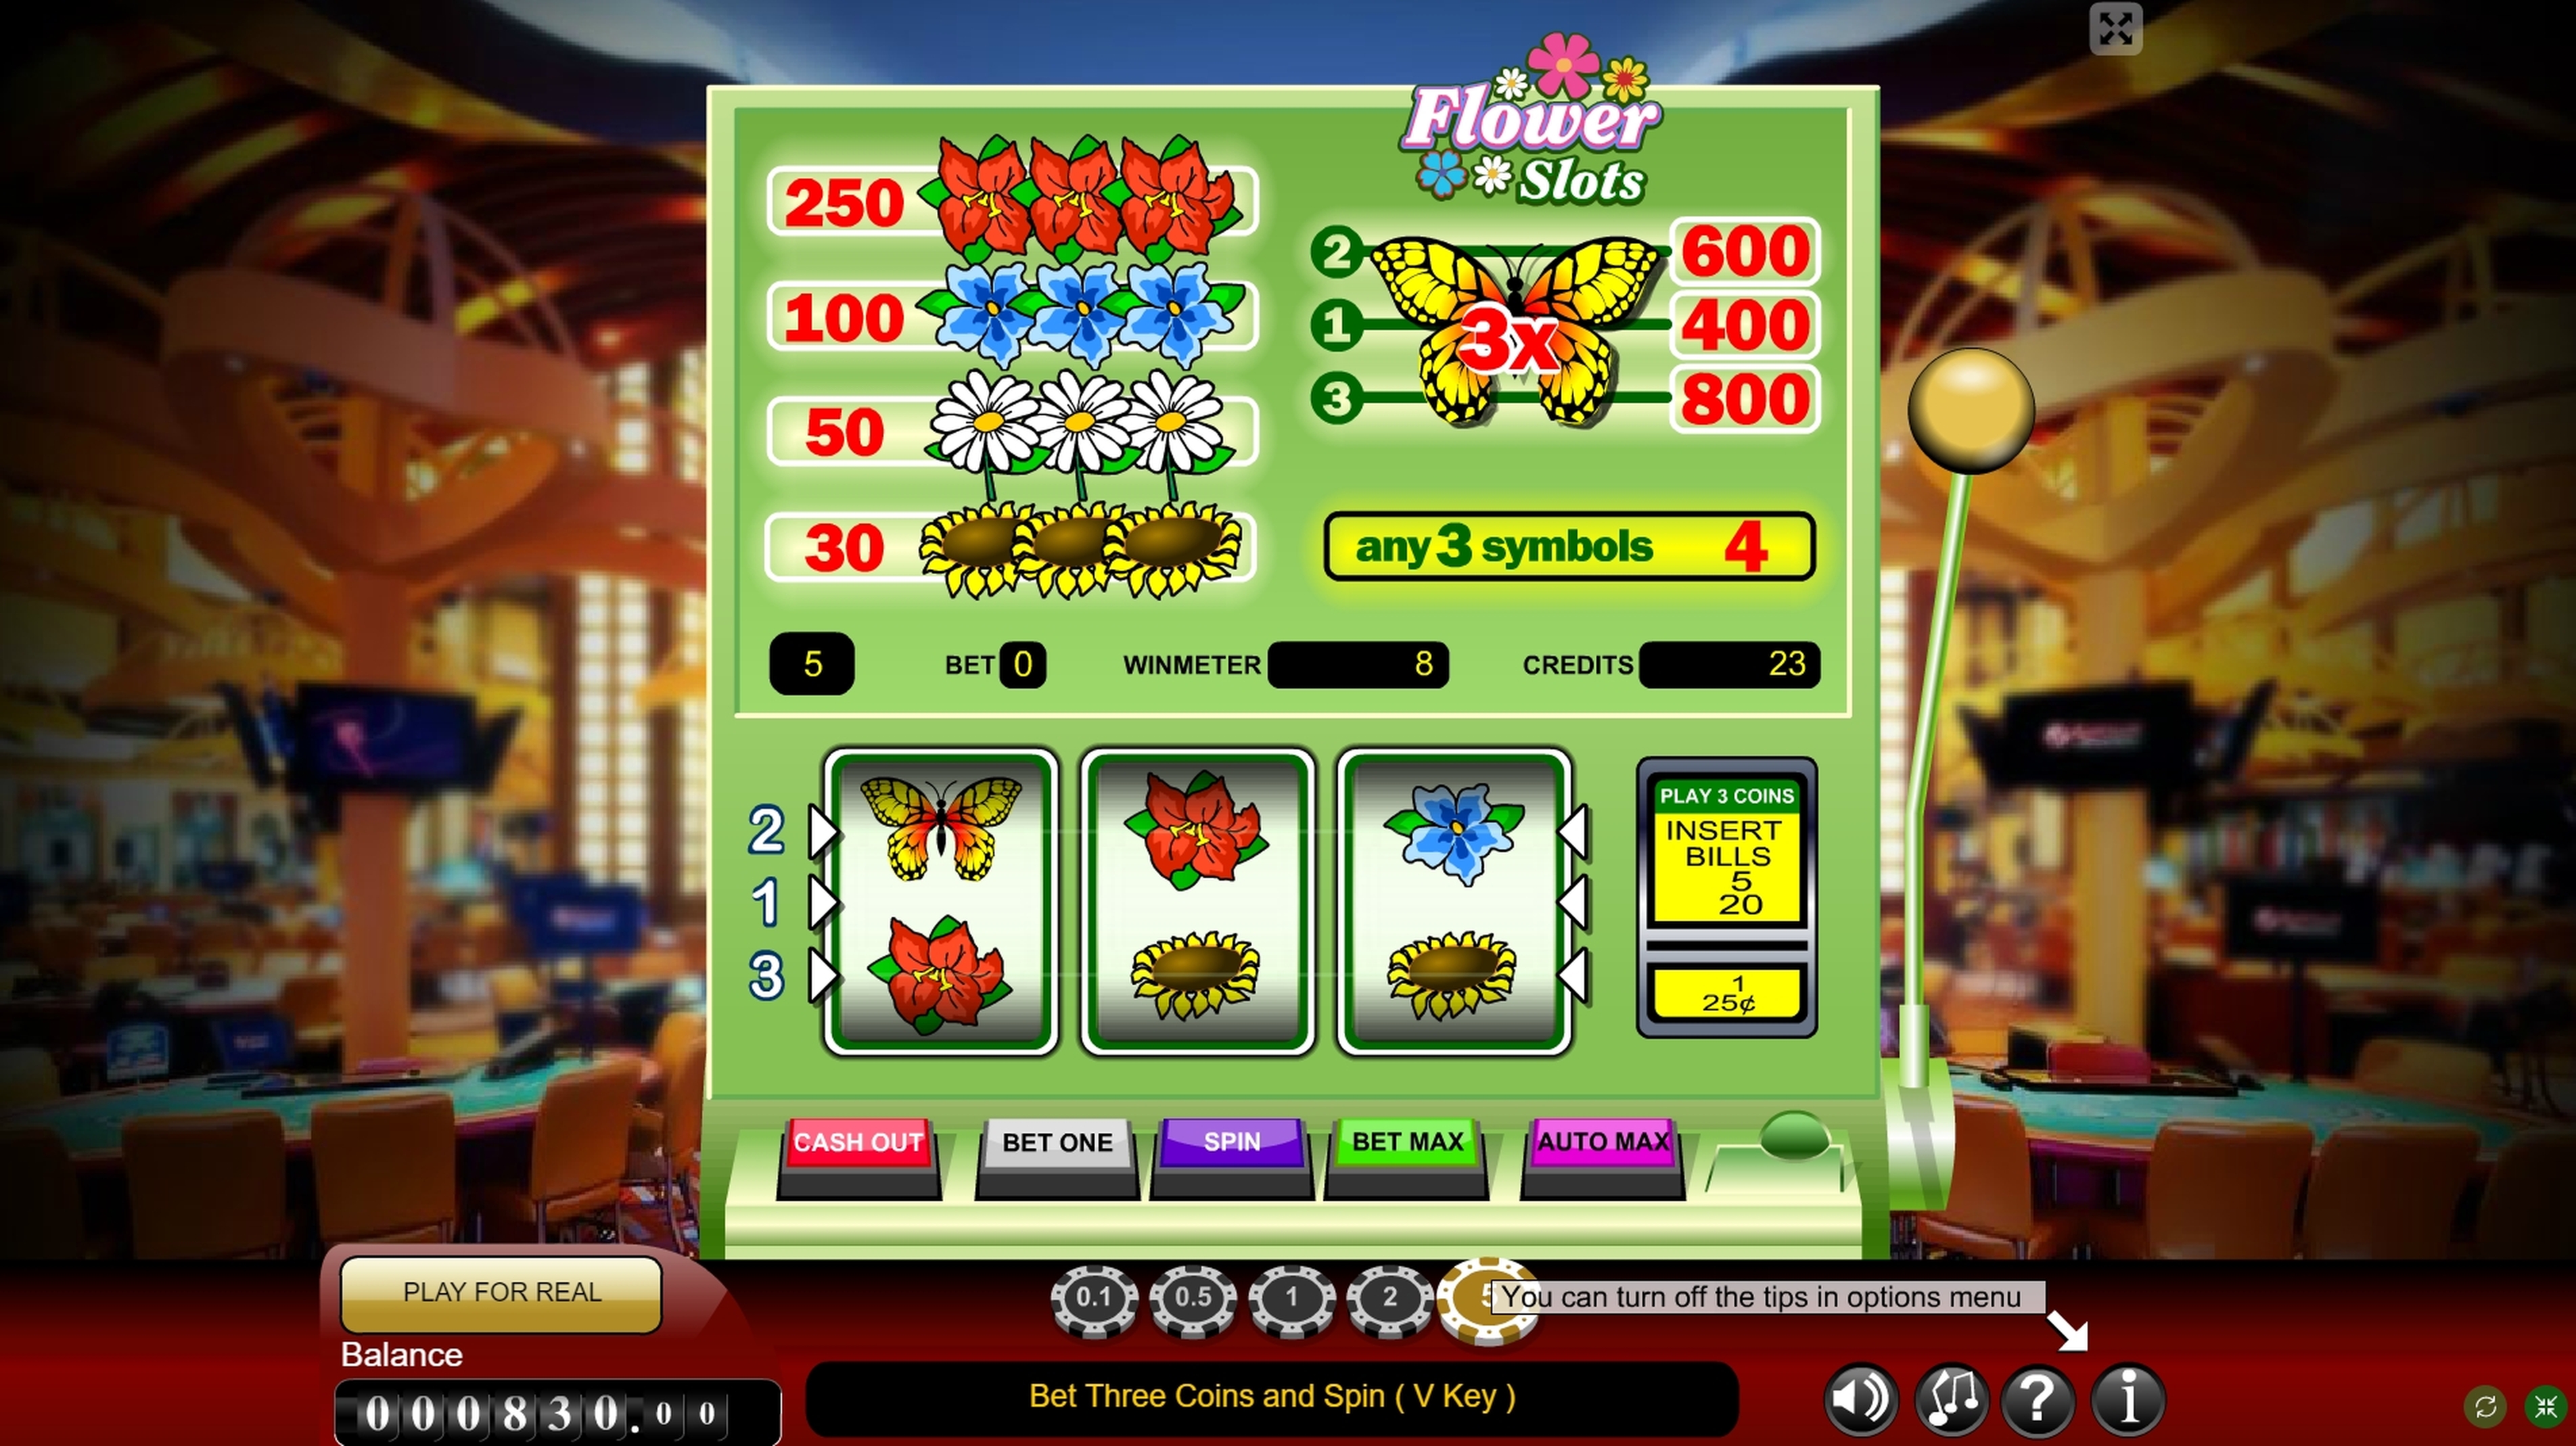 Win Money in Flower Slots Free Slot Game by Gamescale Software